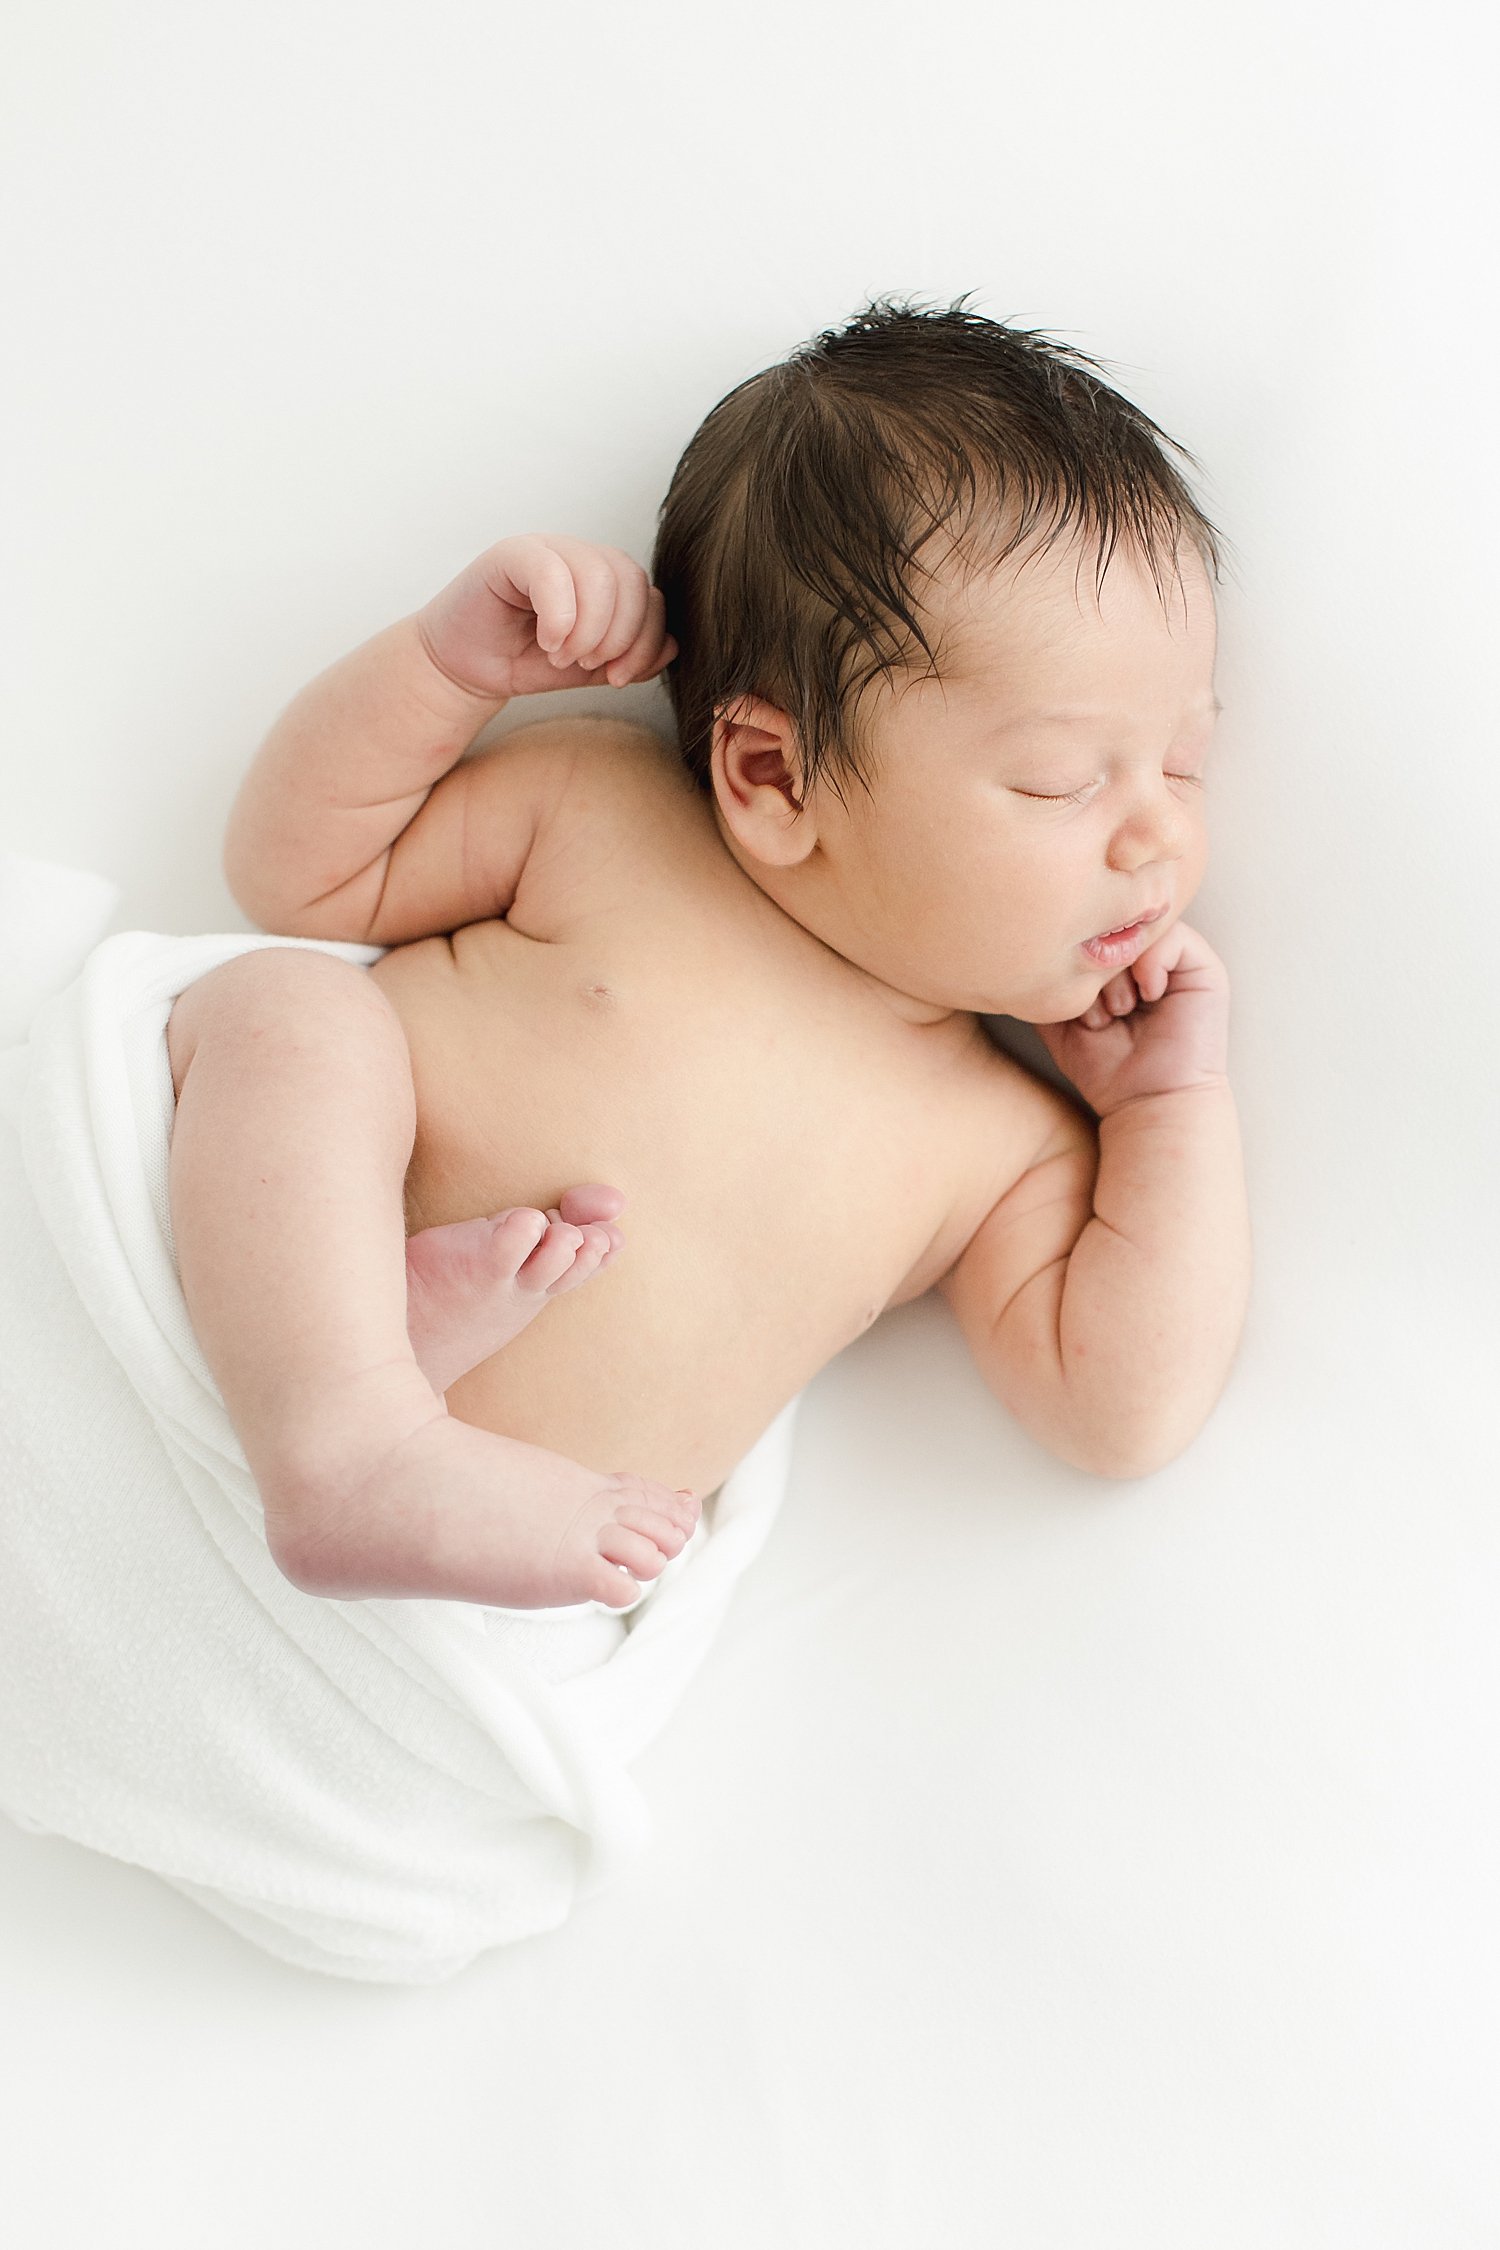 Newborn baby boy curled up for photos | Kristin Wood Photography